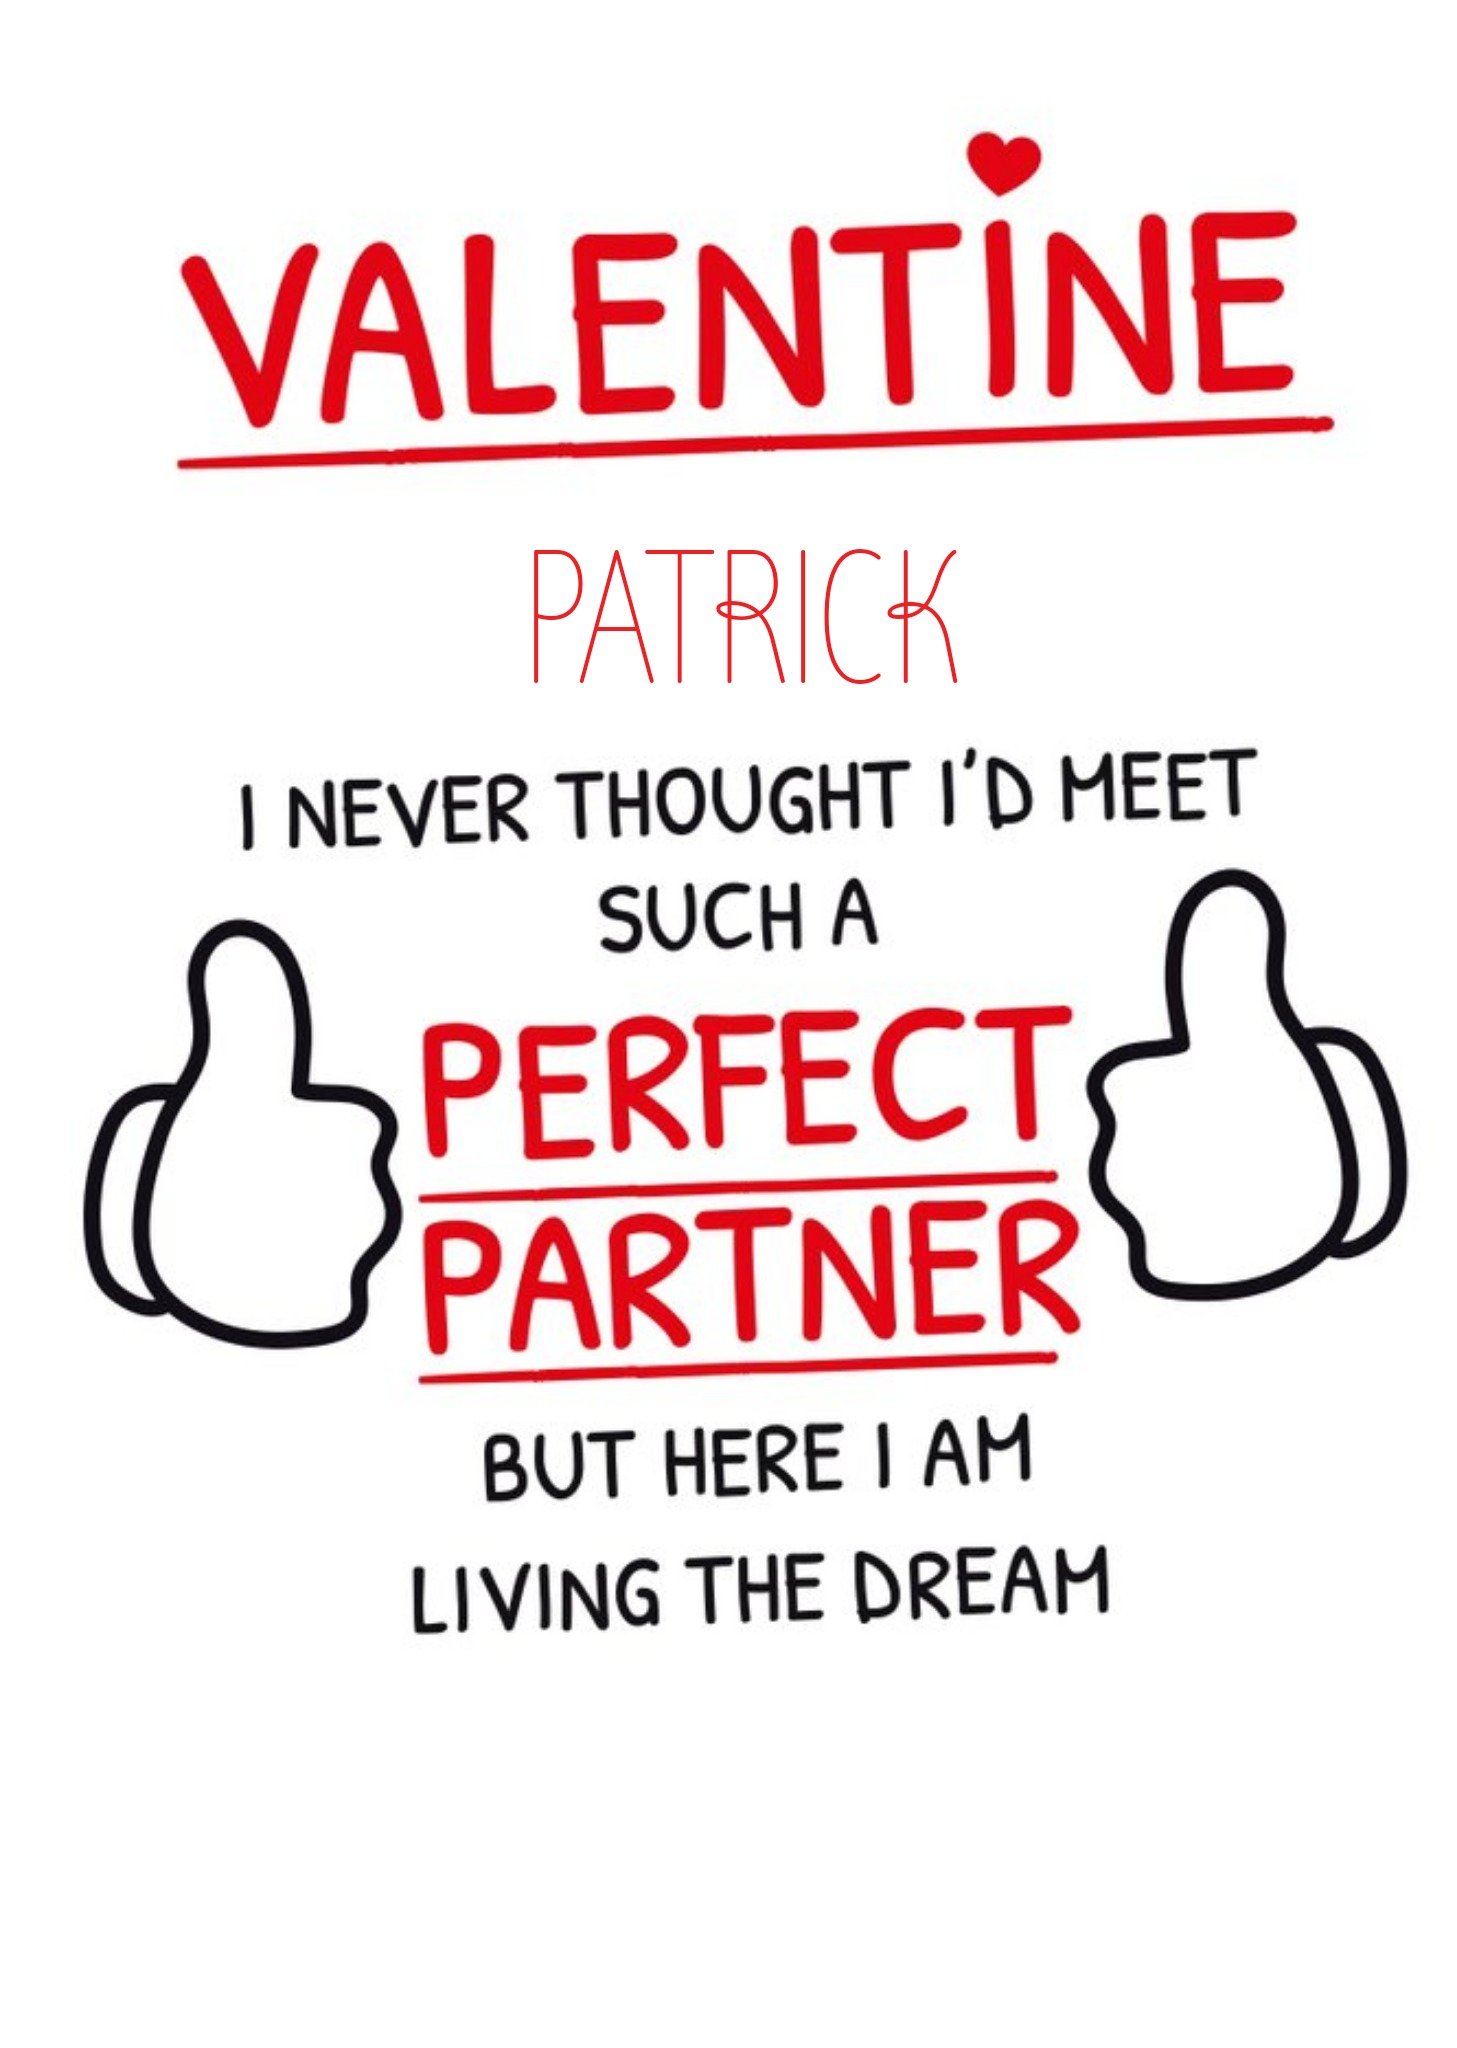 Moonpig Typography With Illustrations Of Two Thumbs Up Perfect Partner Valentine's Day Card Ecard